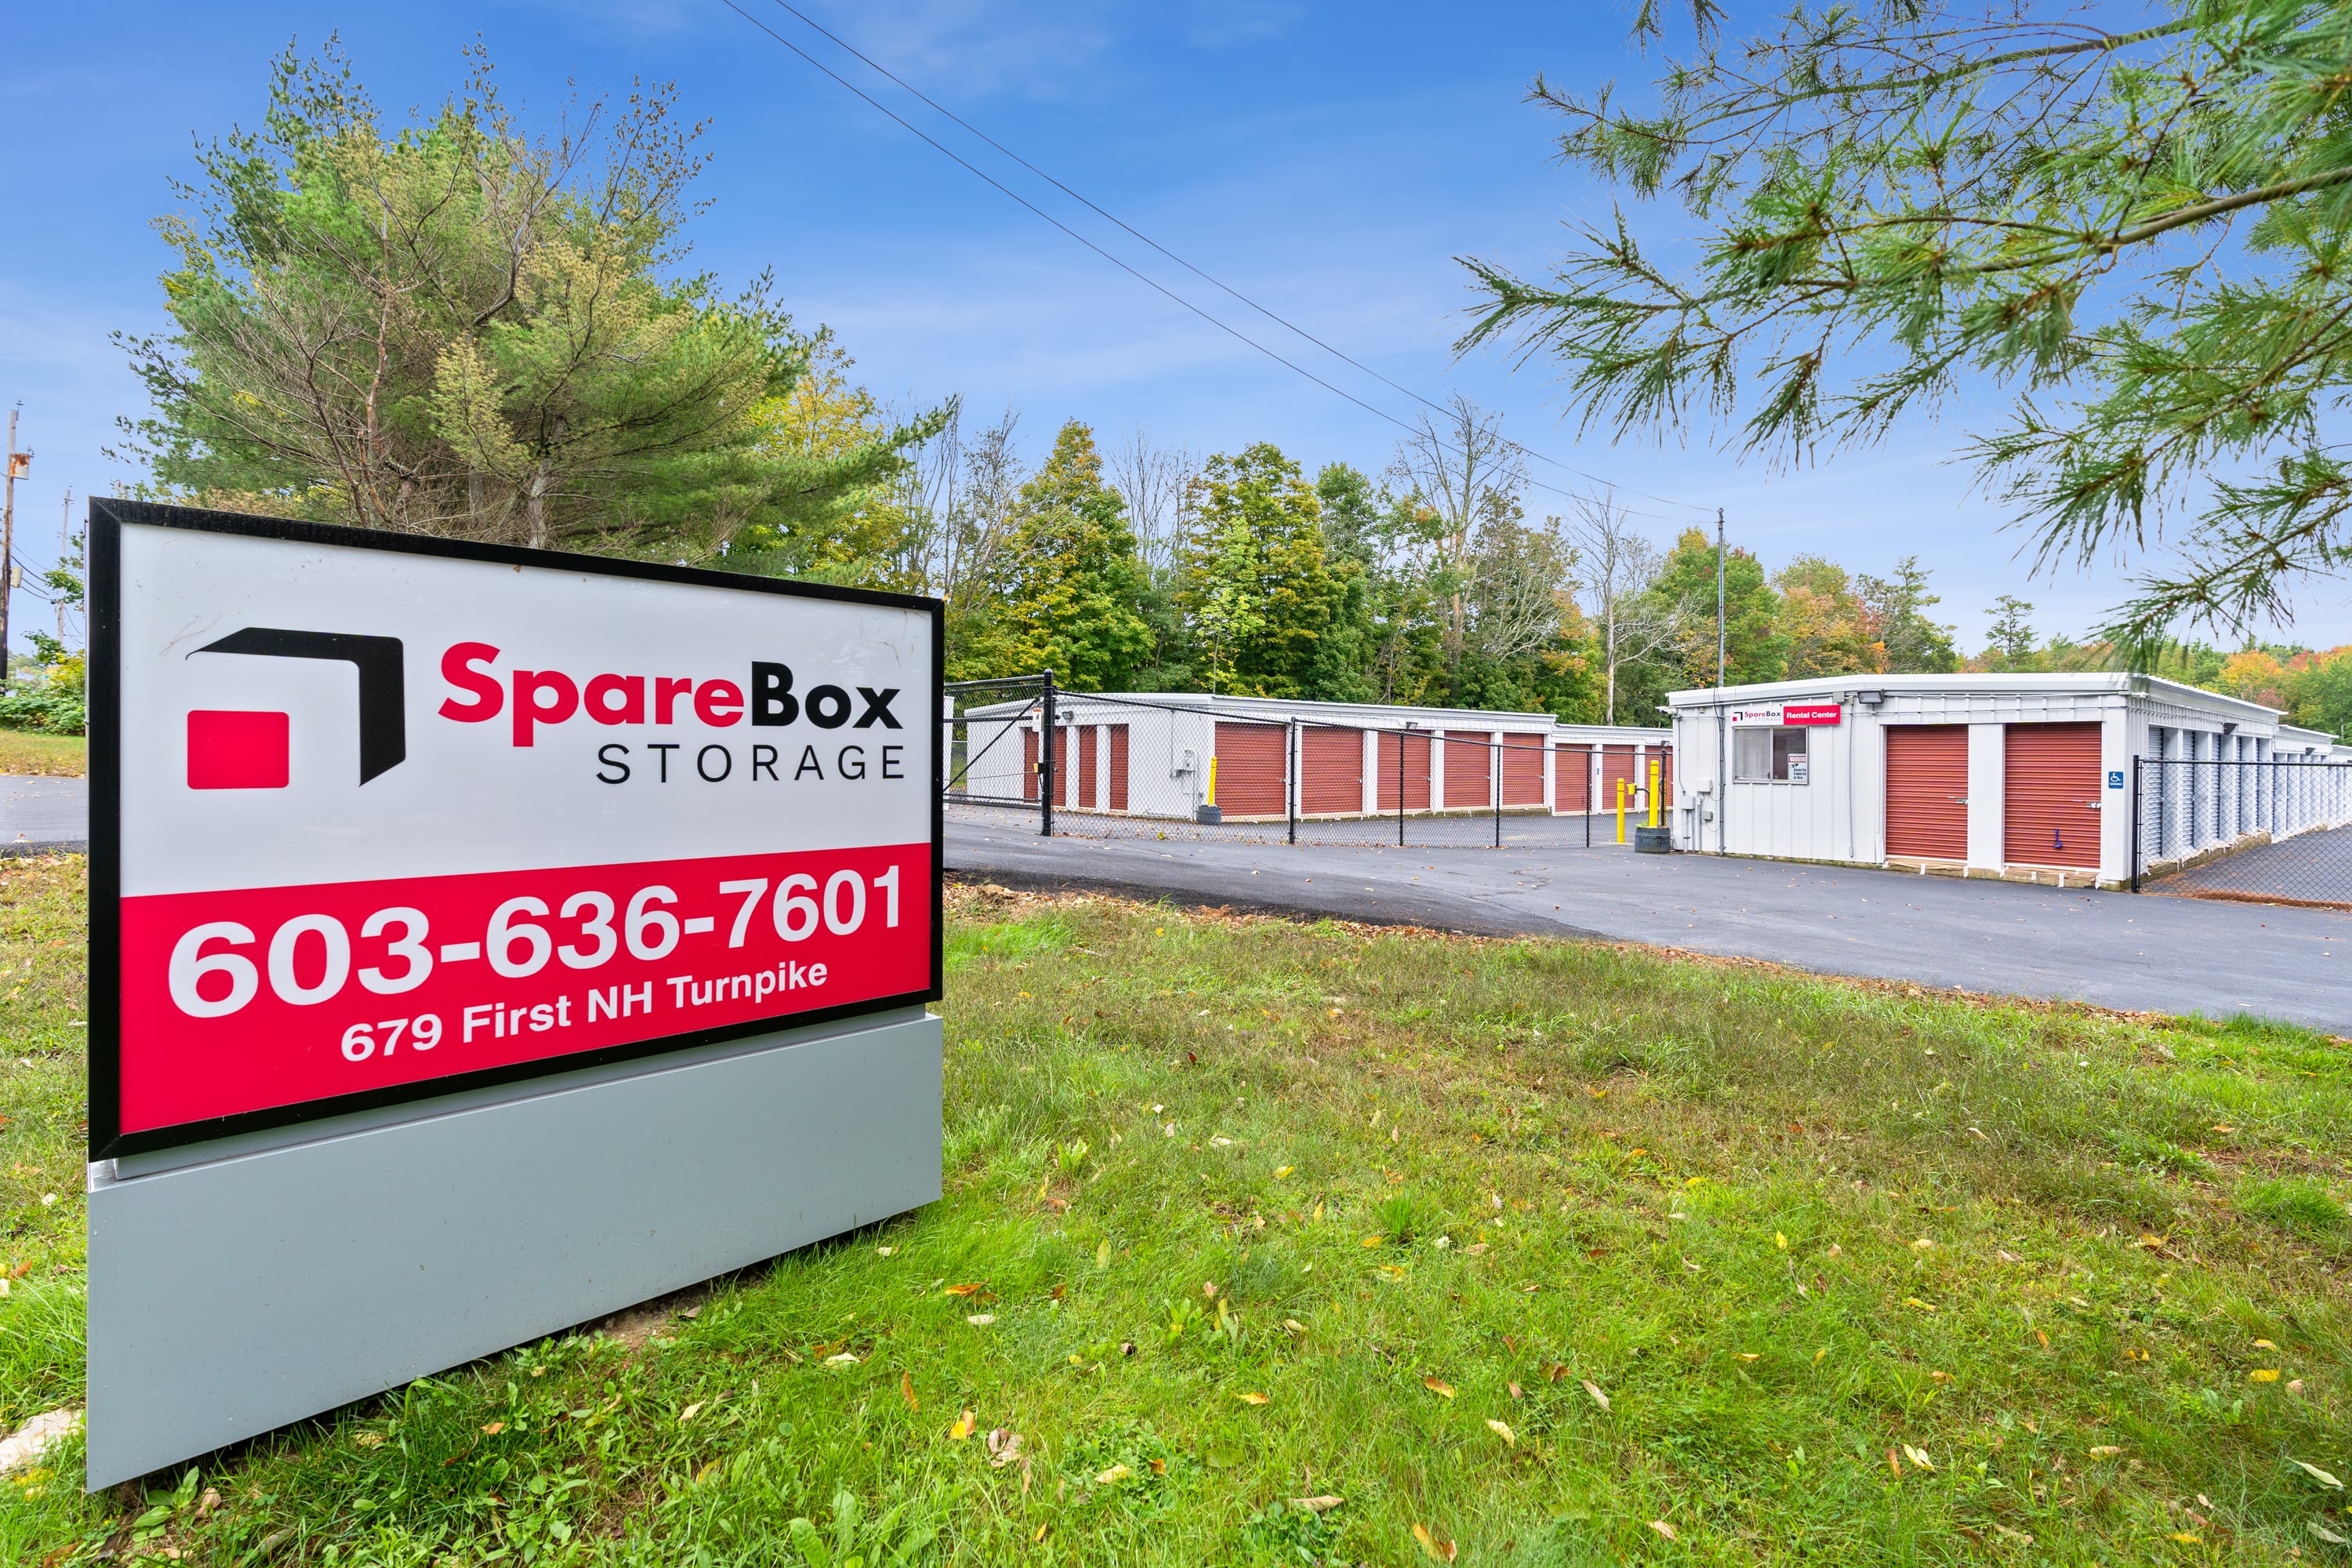 SpareBox has a self-storage location with multiple sizes in Northwood, NH | SpareBox Storage